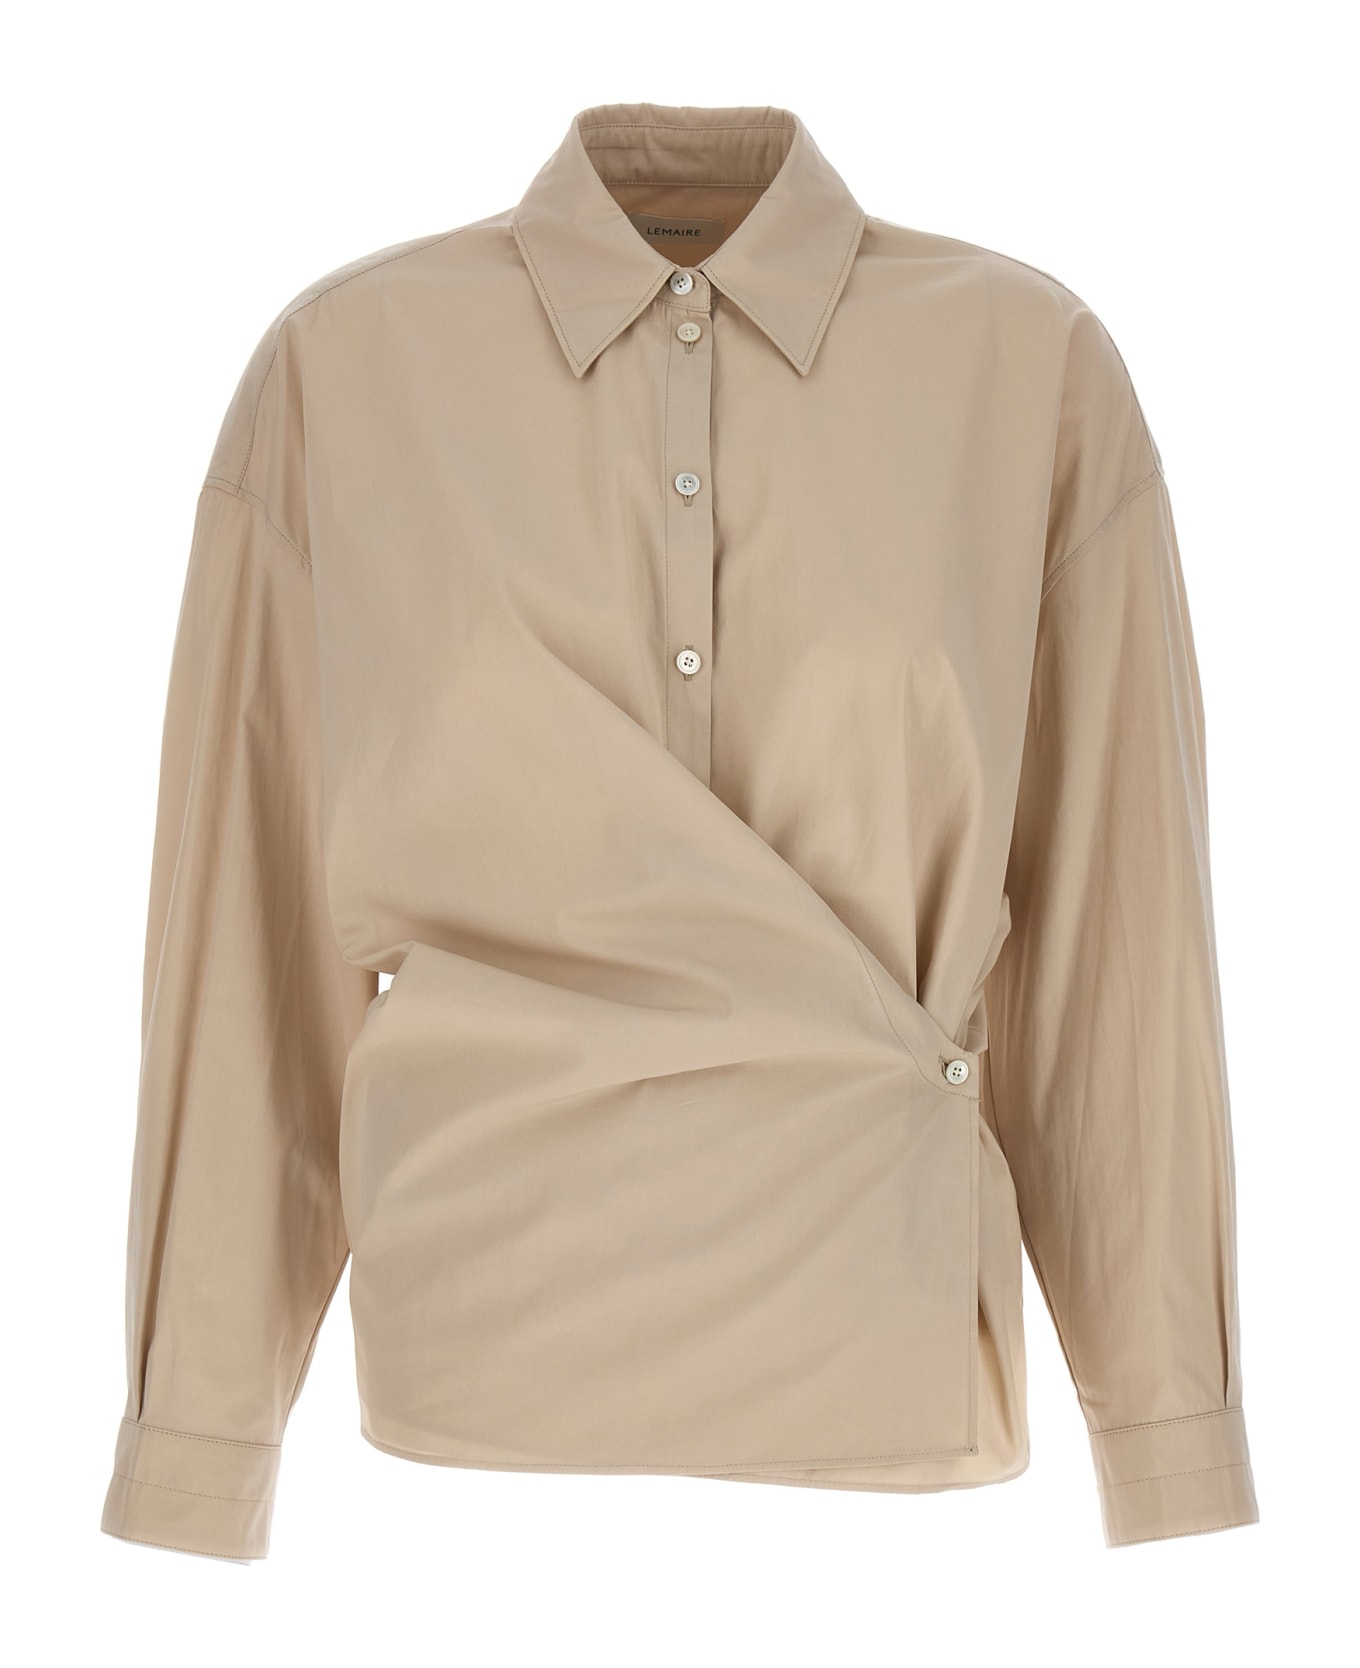 Lemaire 'twisted' Shirt - Dusty Rose